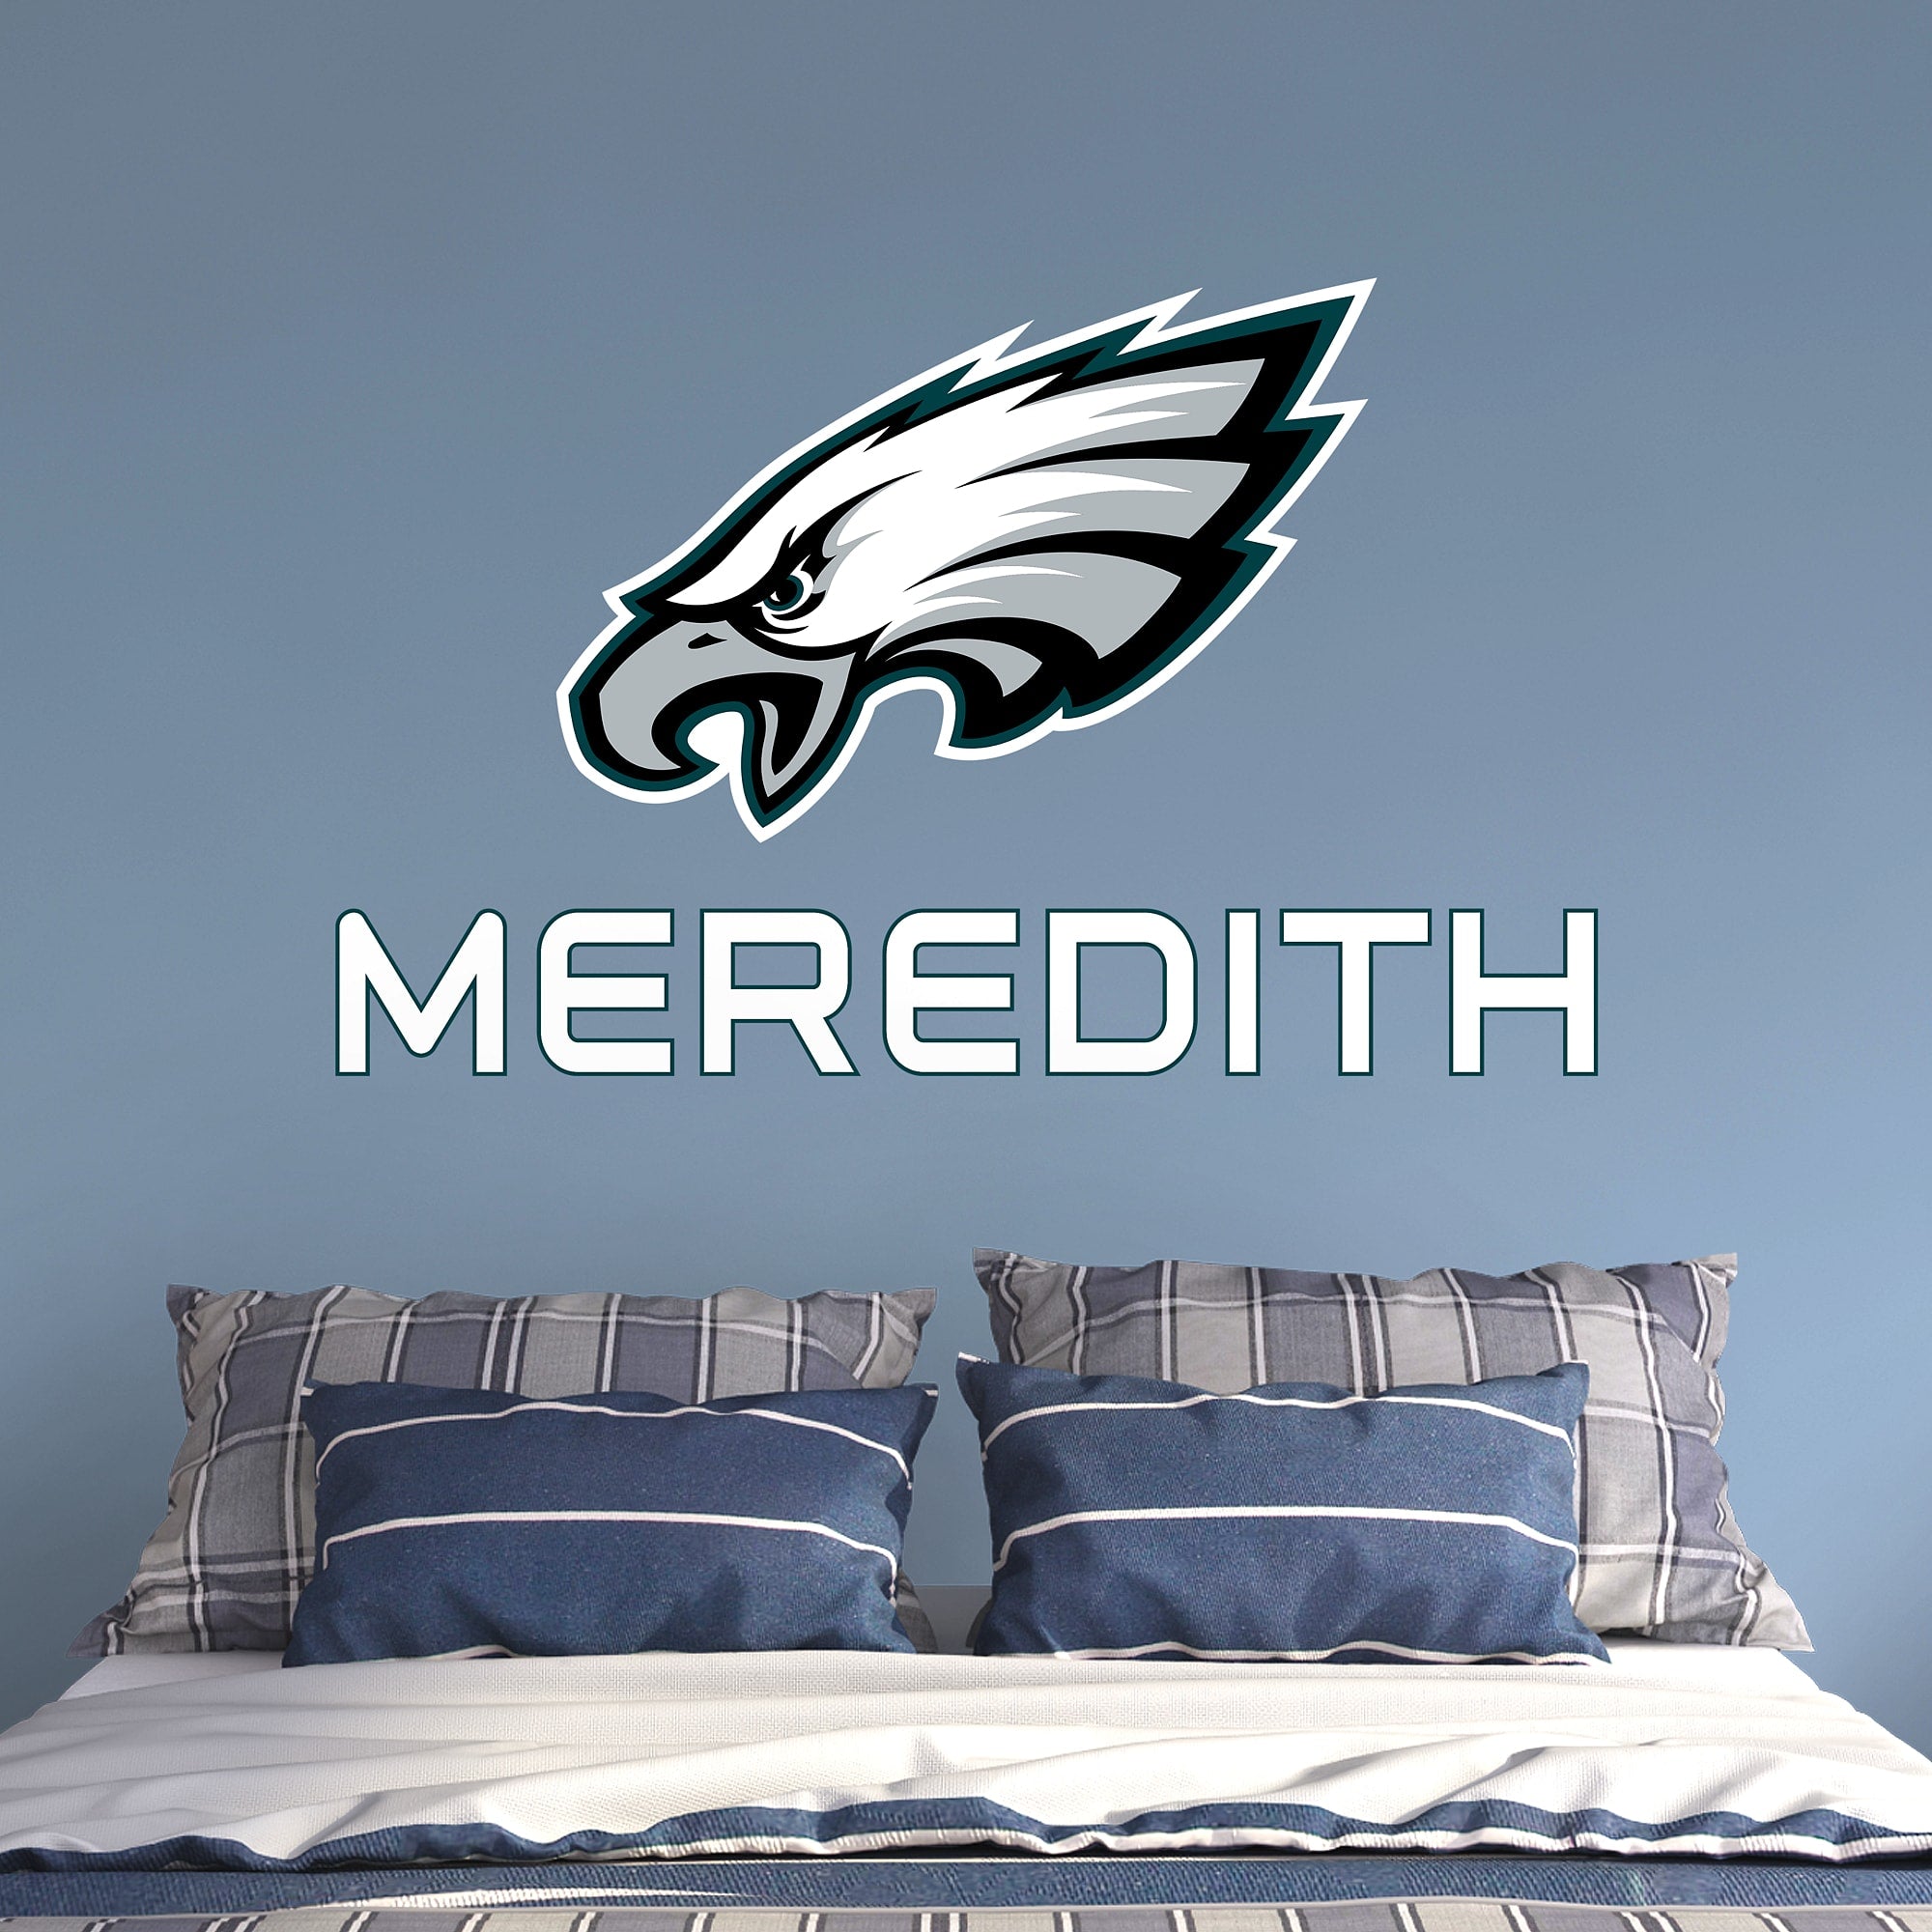 Philadelphia Eagles: Stacked Personalized Name - Officially Licensed NFL Transfer Decal in White (52"W x 39.5"H) by Fathead | Vi